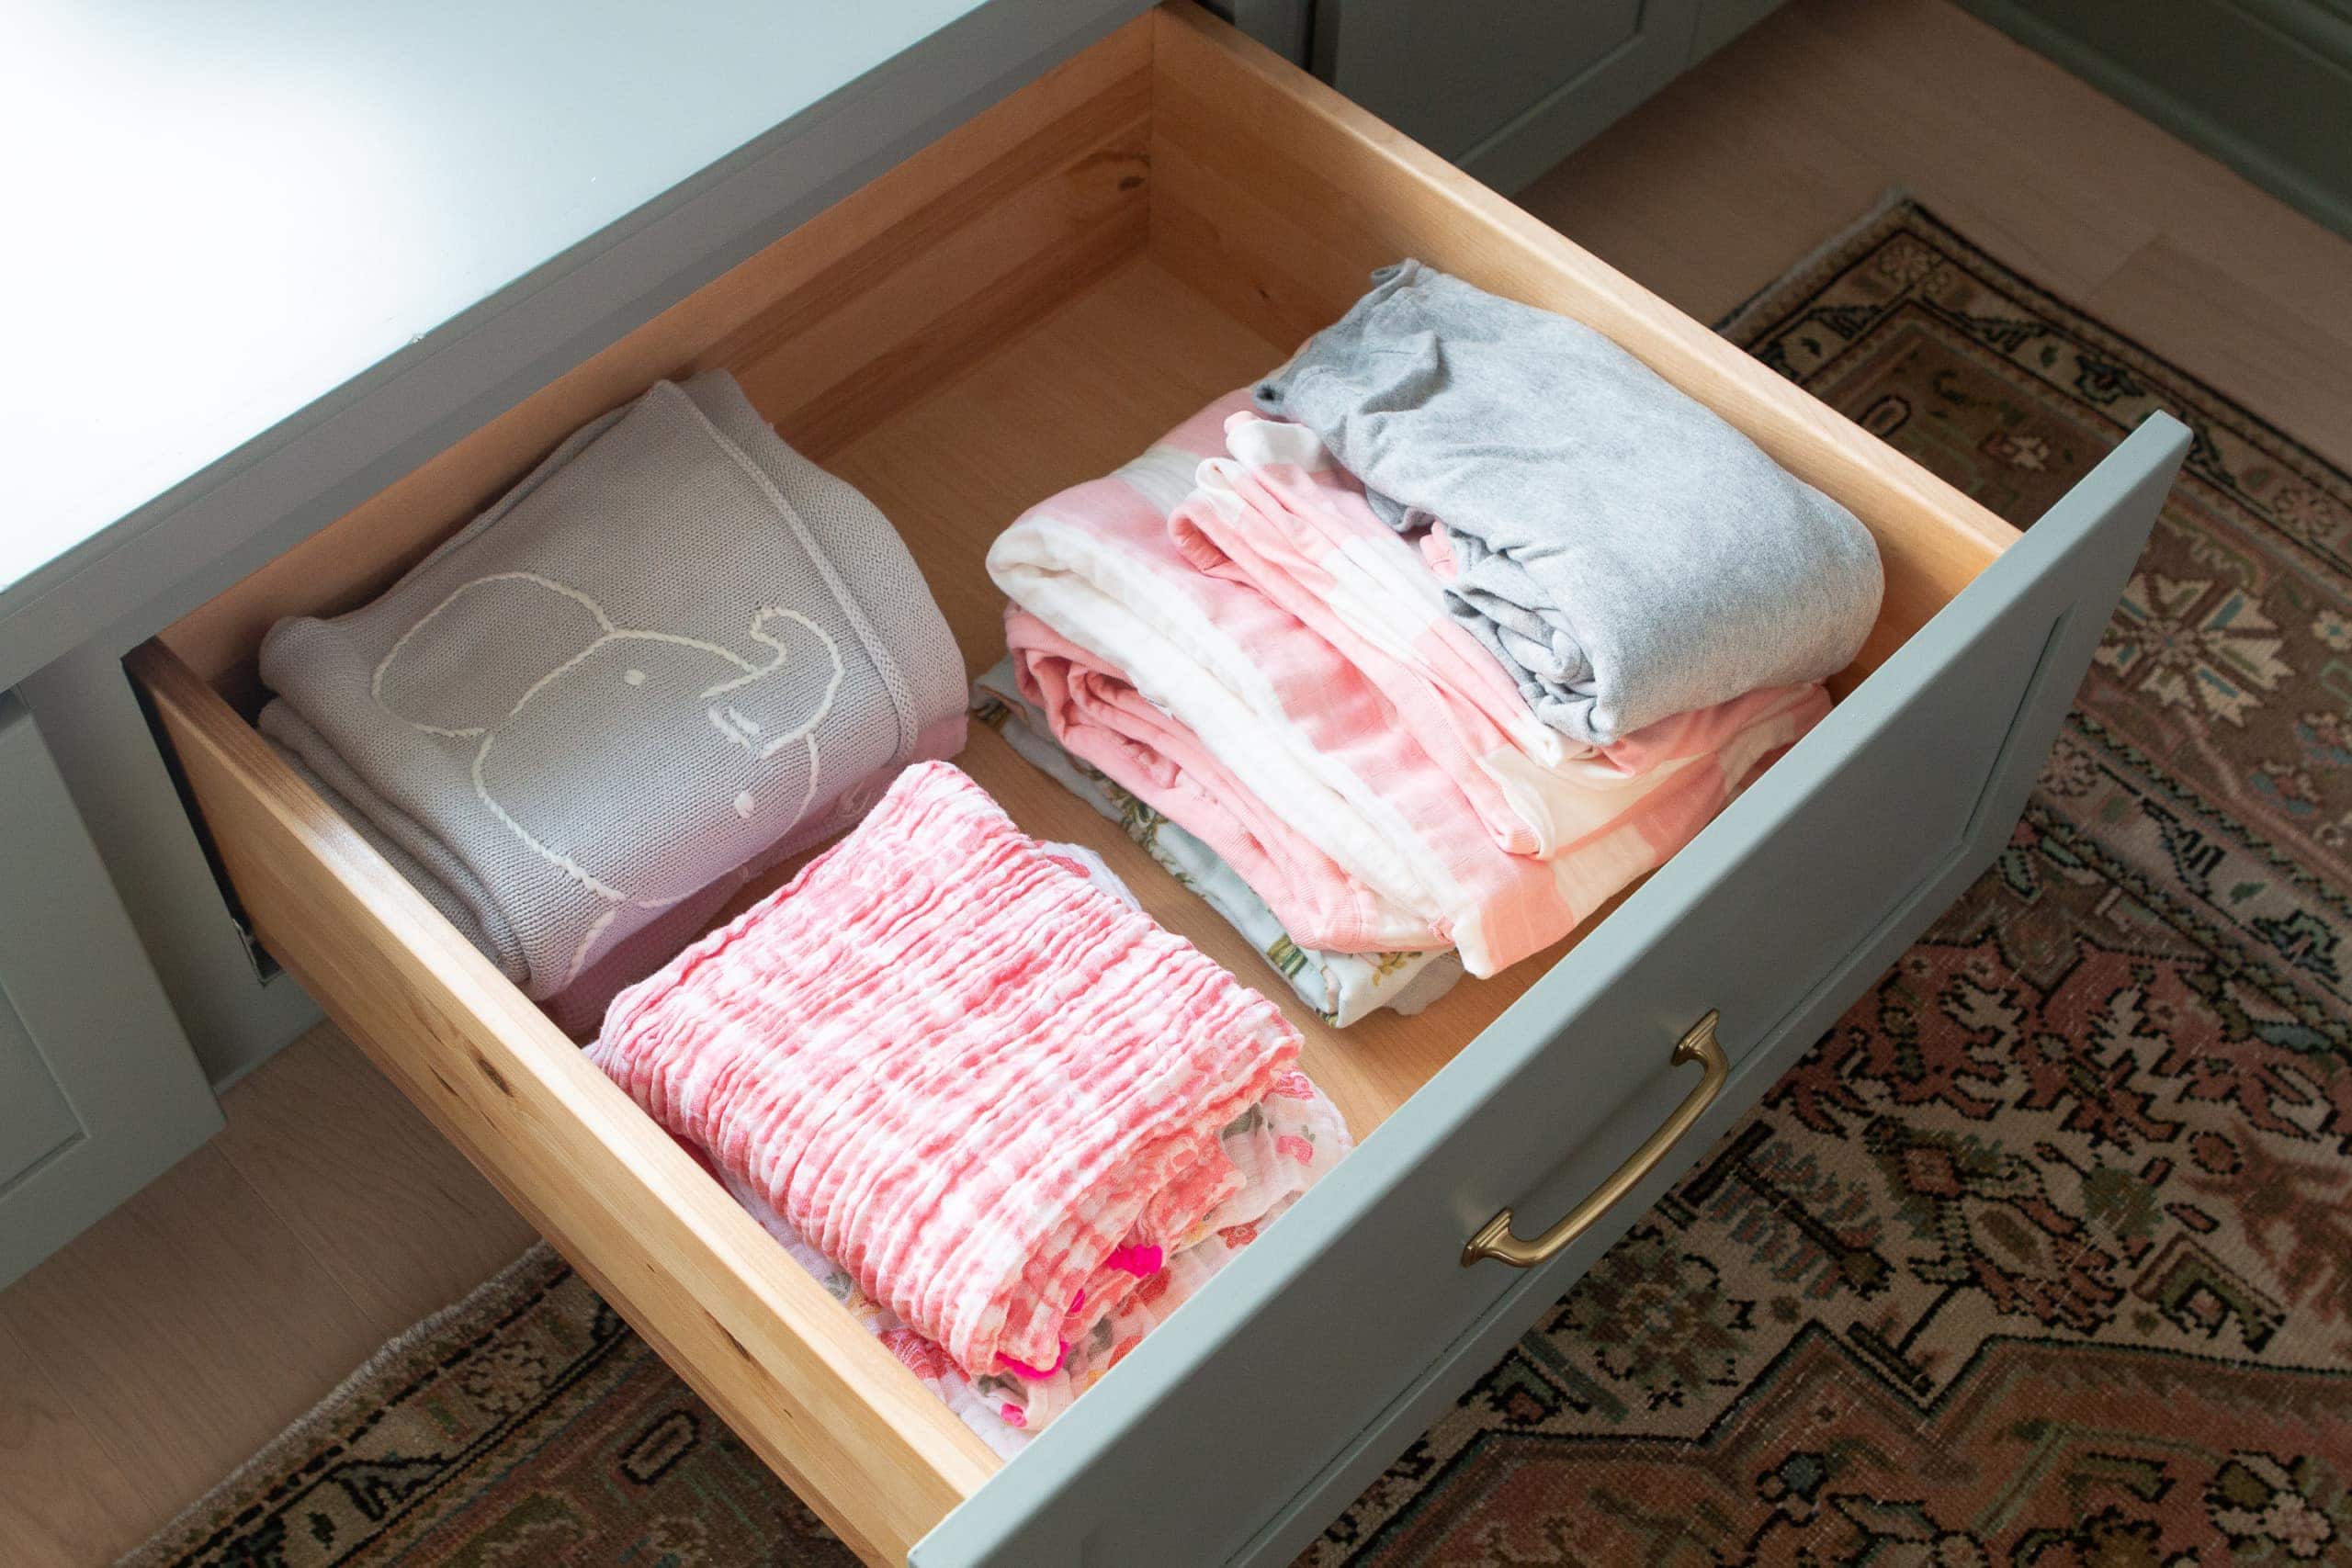 Extra blankets in a pull-out drawer in the nursery